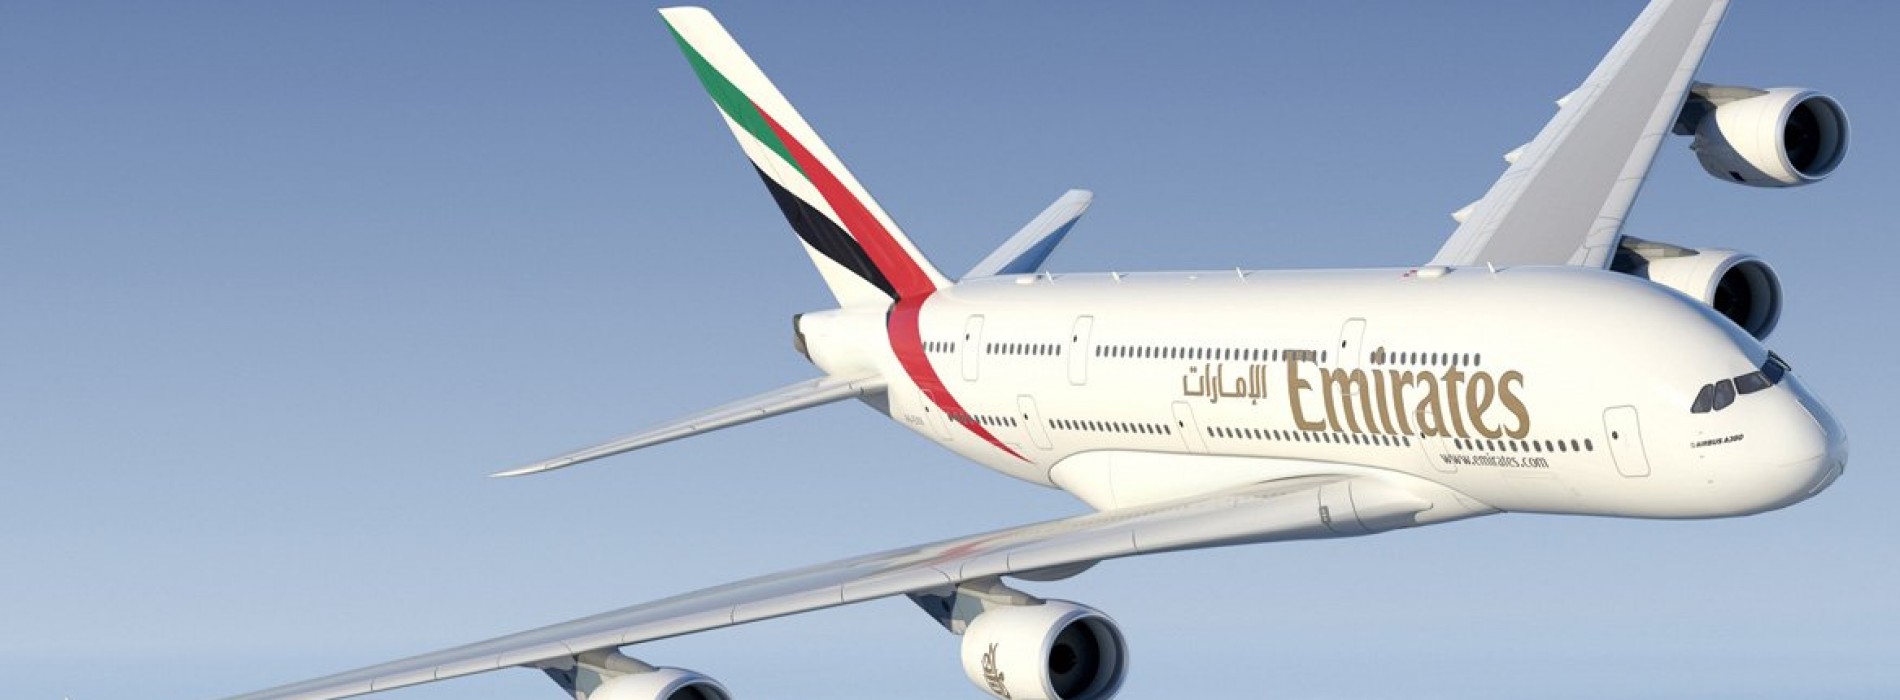 Emirates to fly to Toronto five times a week starting Aug 18